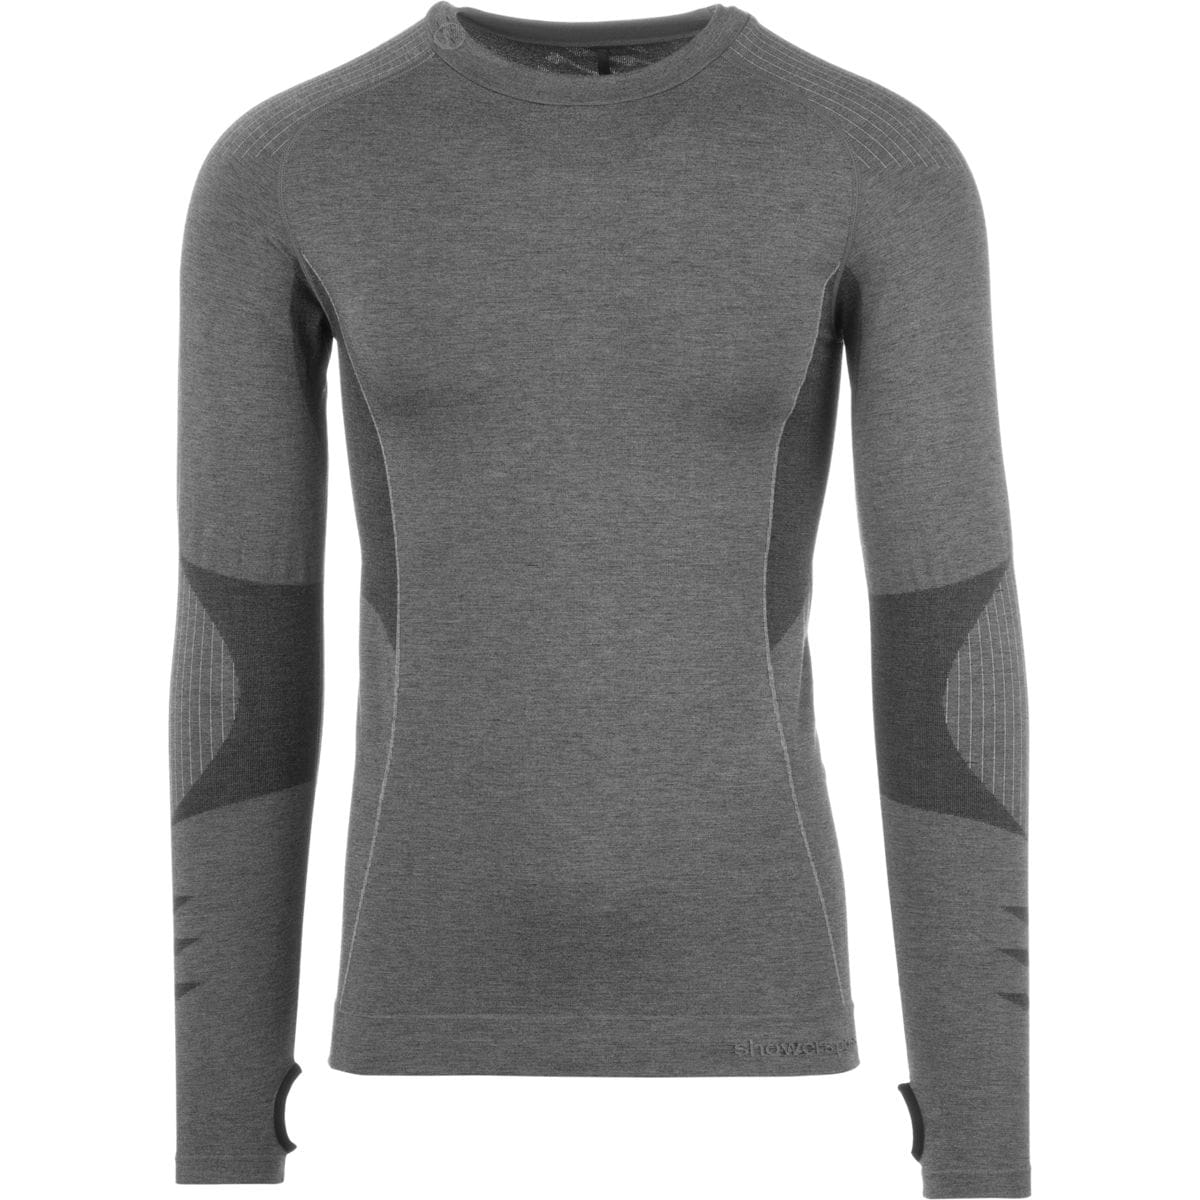 Showers Pass Long-Sleeve Body-Mapped Base Layer - Men's